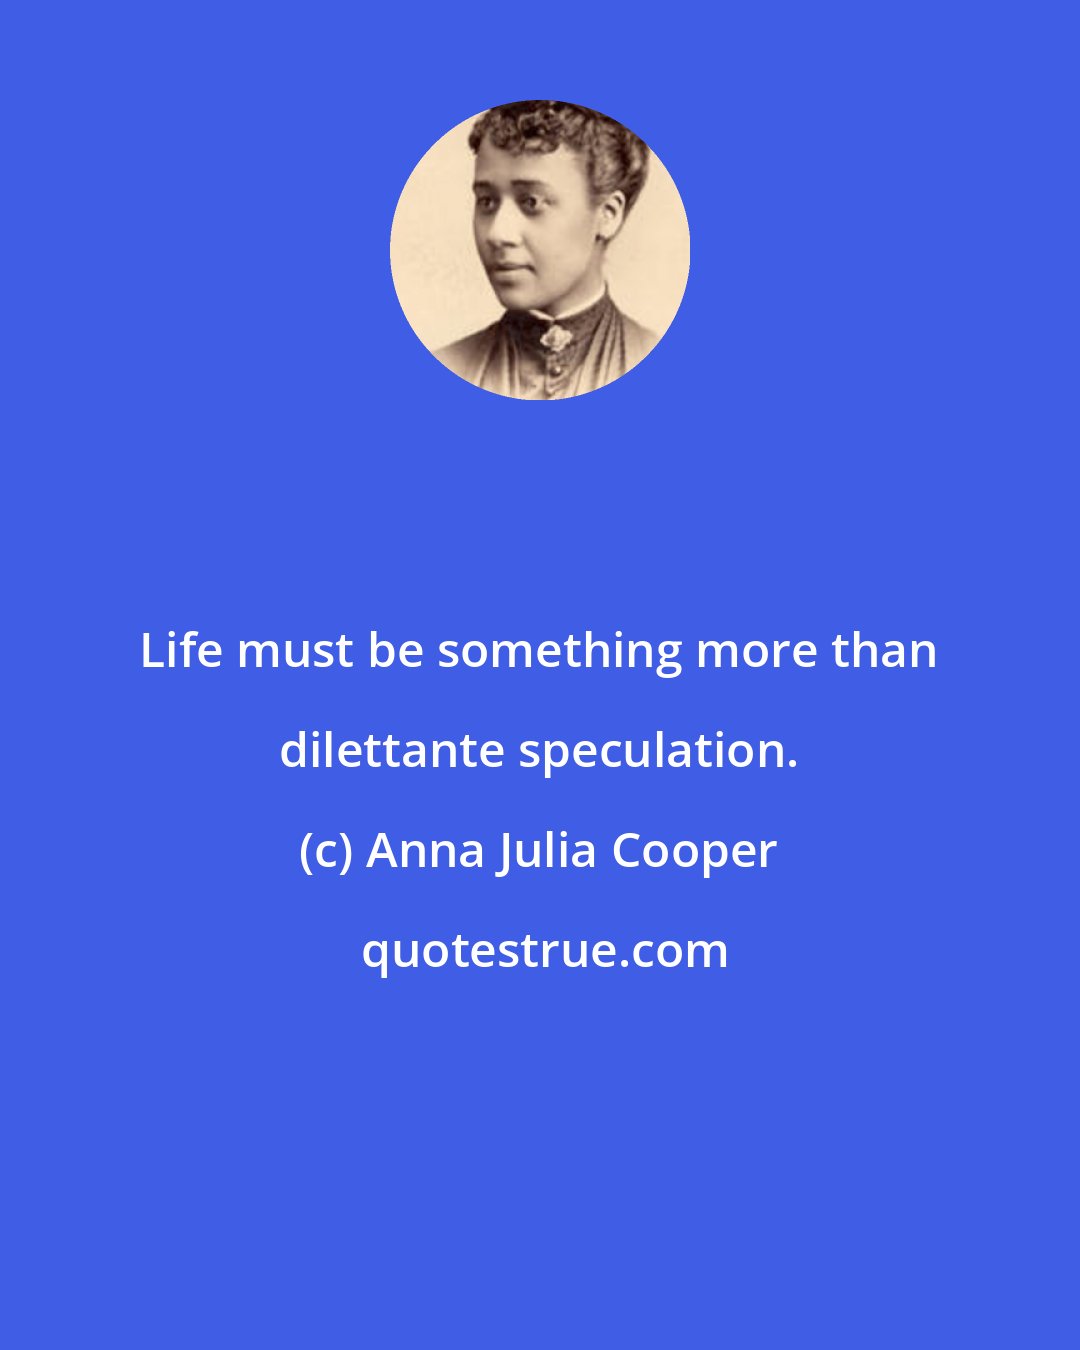 Anna Julia Cooper: Life must be something more than dilettante speculation.